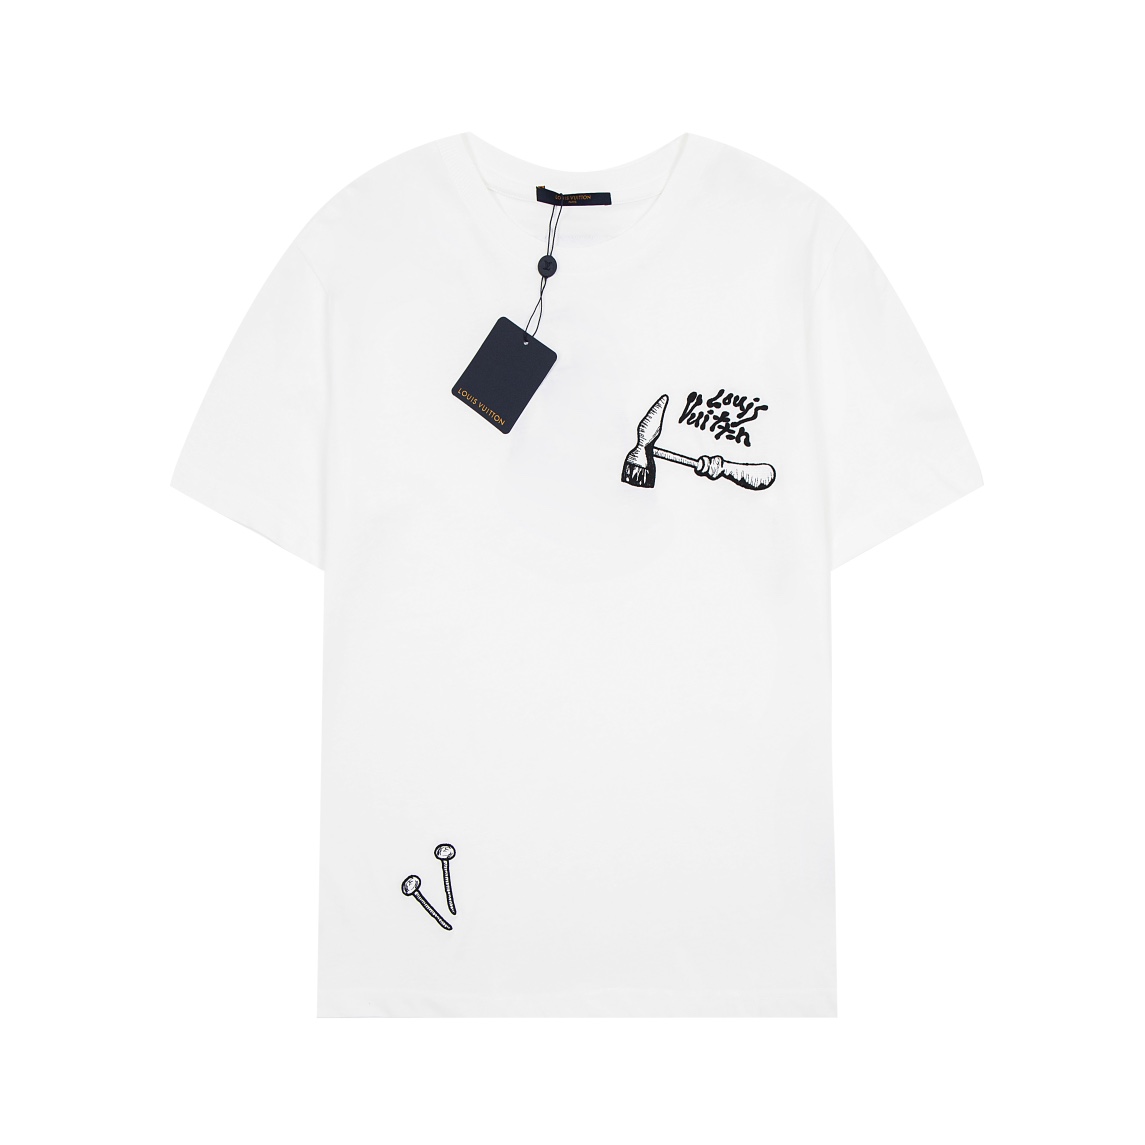 Louis Vuitton Perfect
 Clothing T-Shirt Black Blue White Embroidery Unisex Spring/Summer Collection